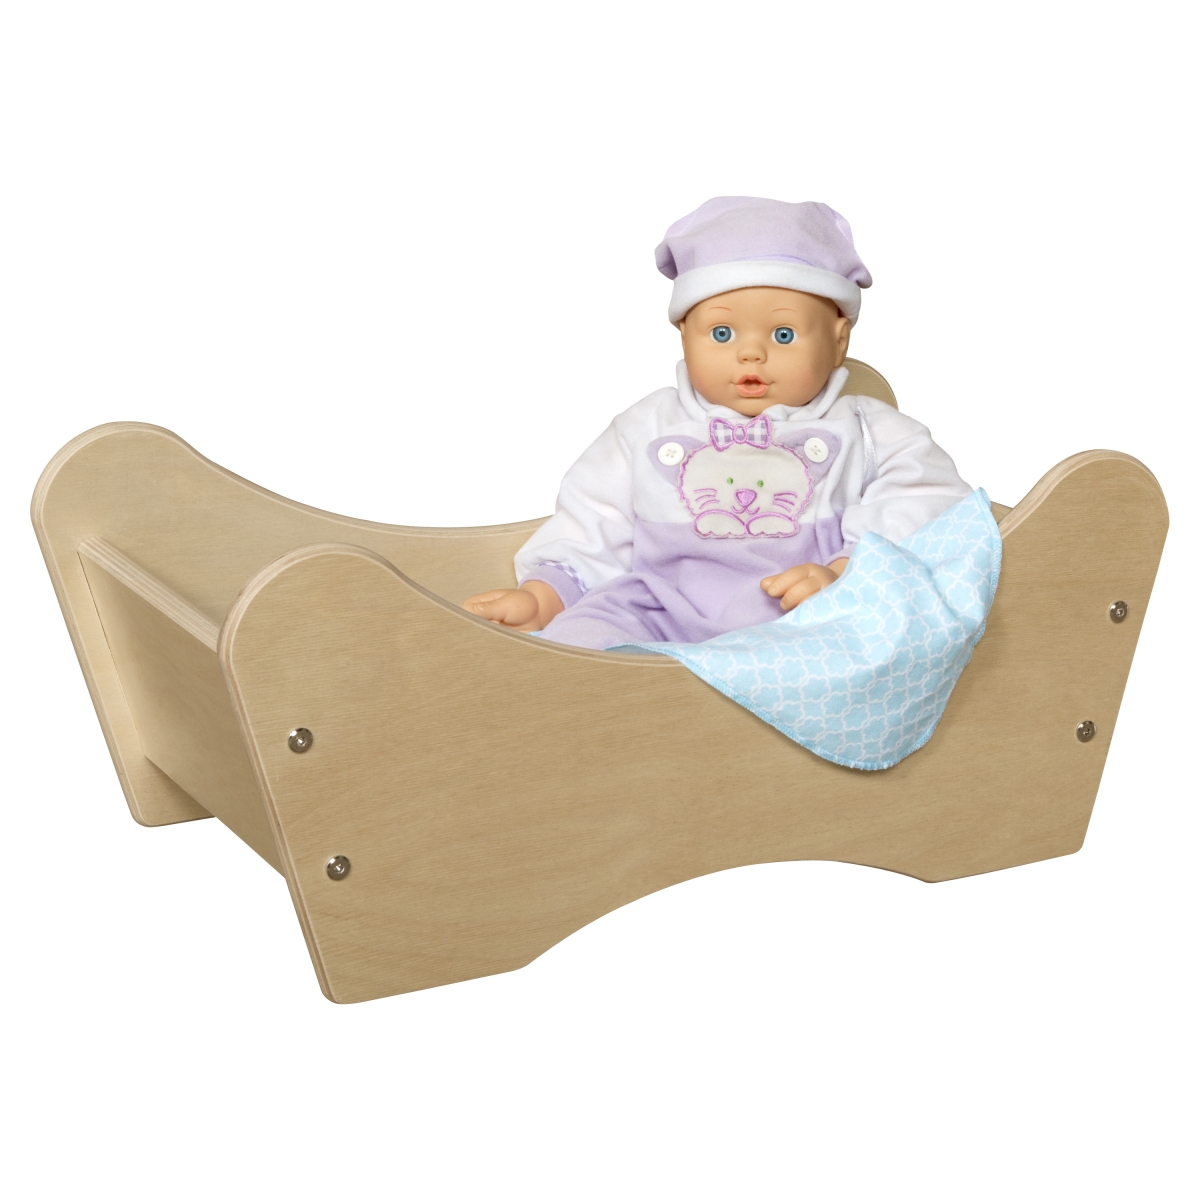 C11500 8.75 In. Doll Bed - Rta